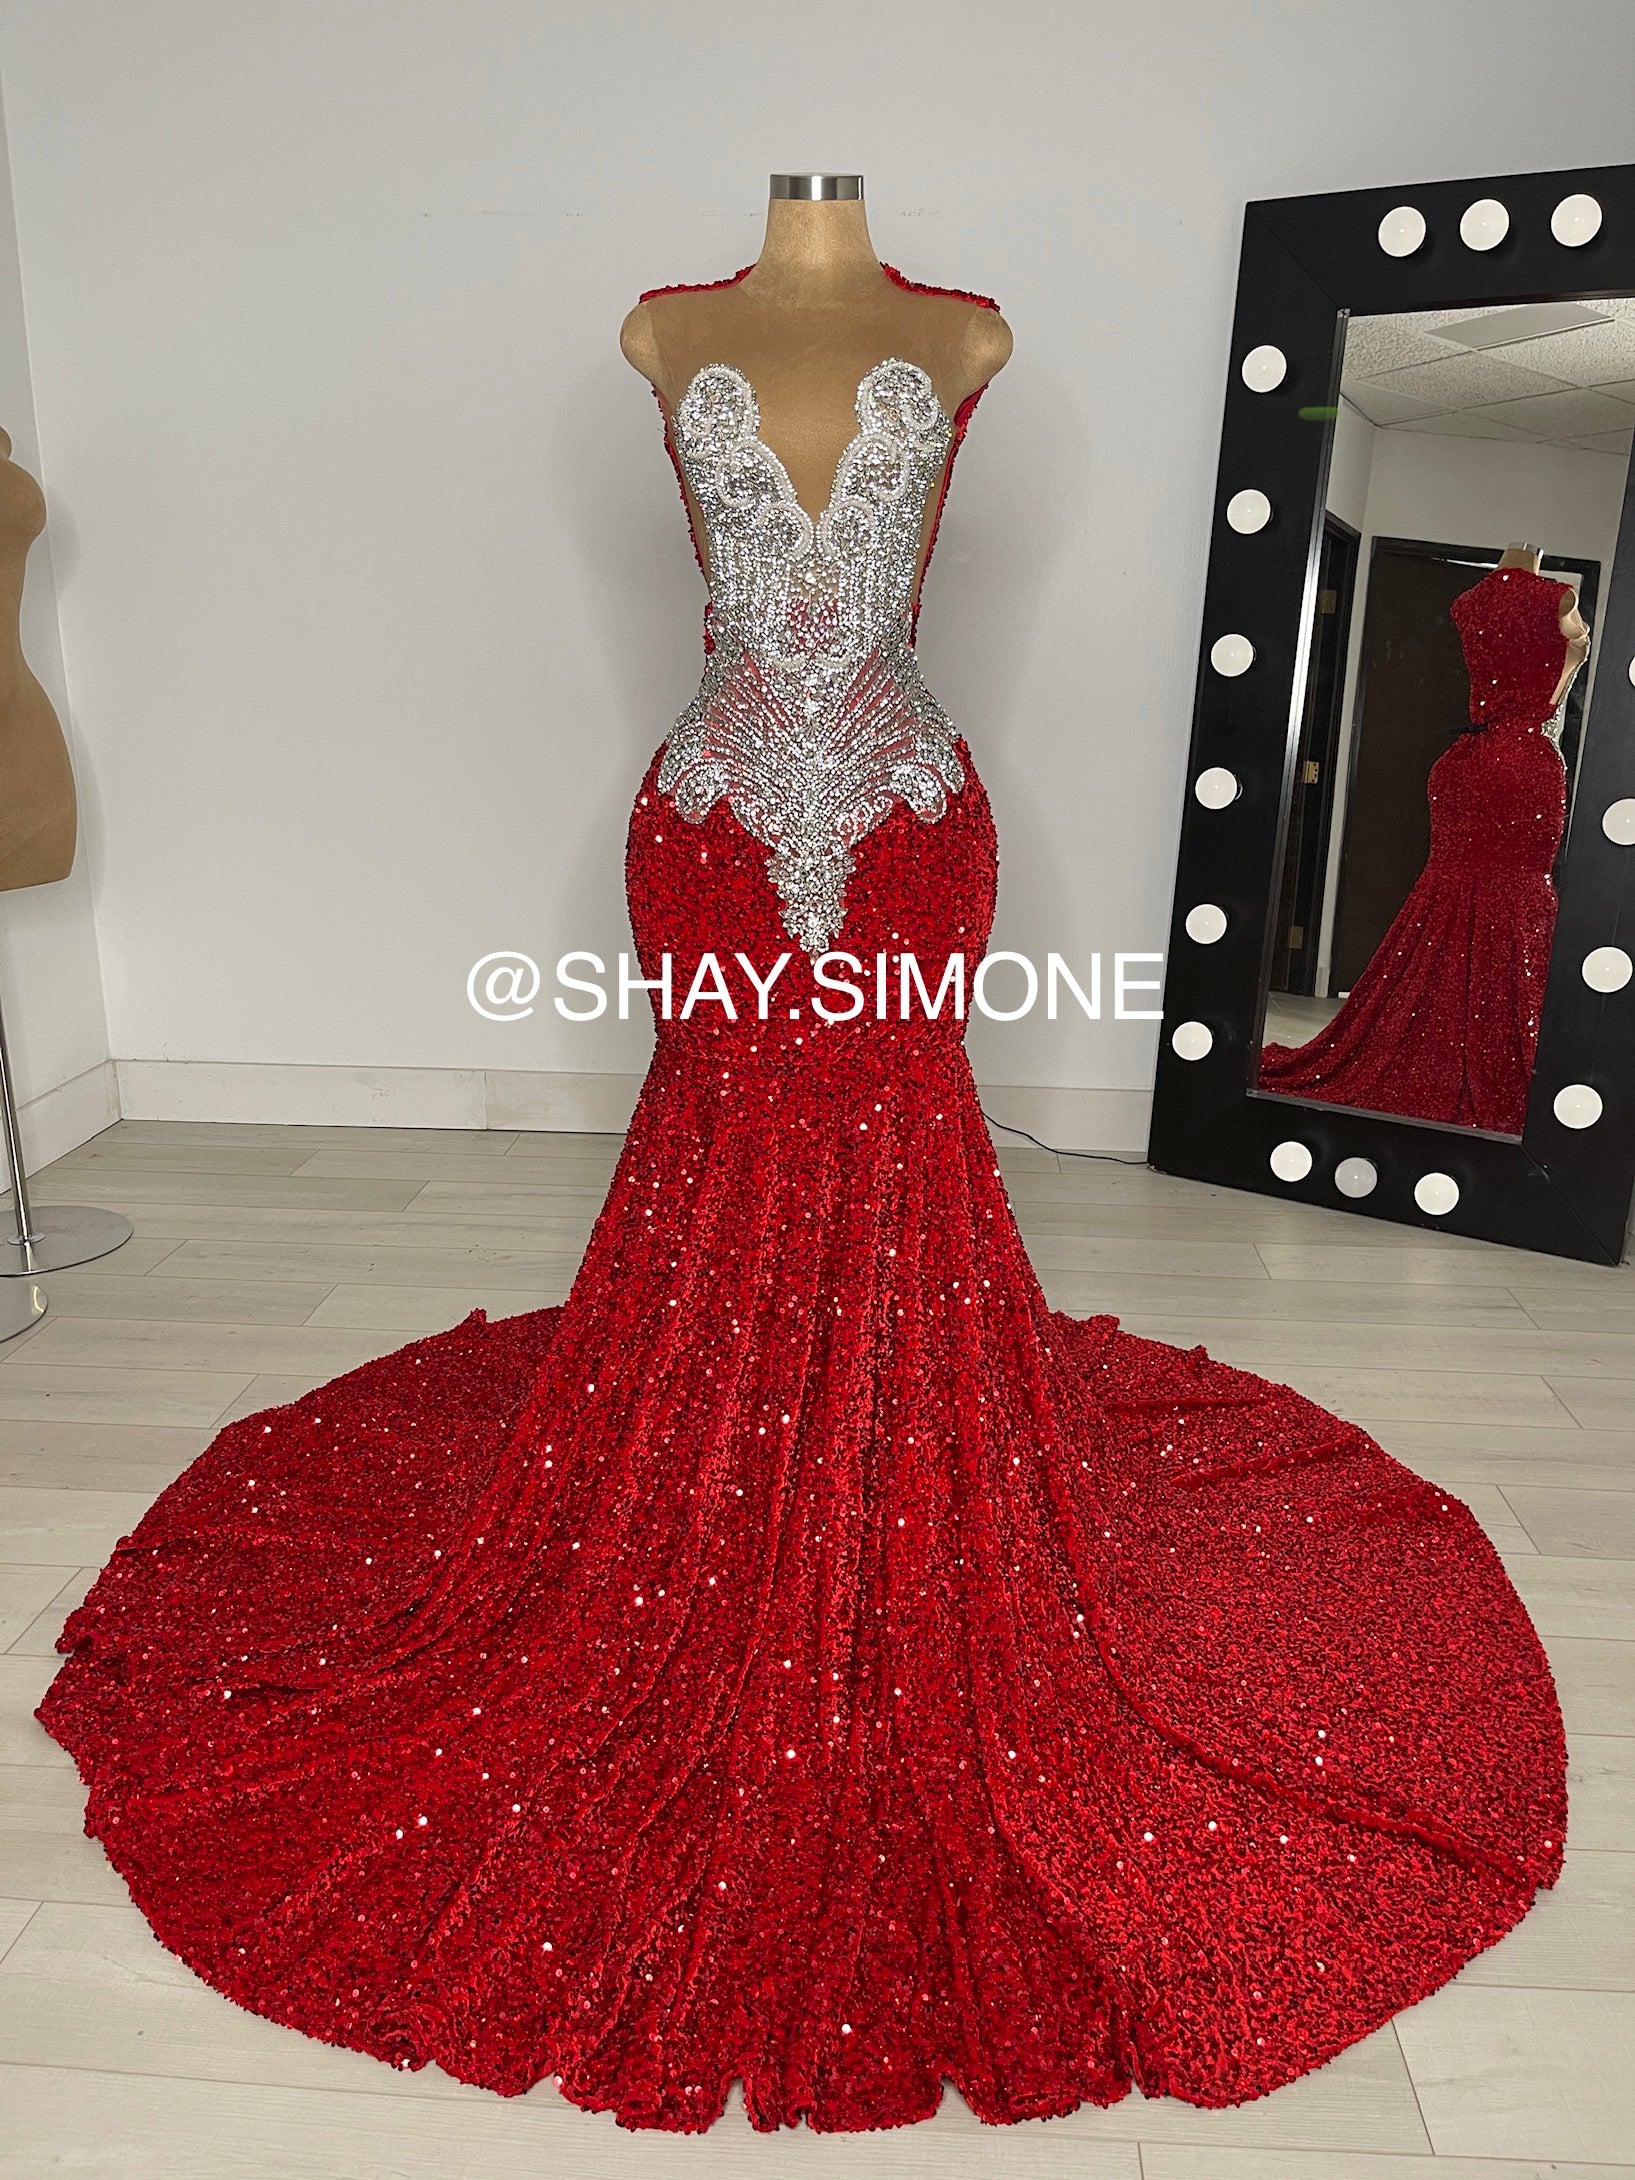 Red Sequin Prom Dress with Silver Rhinestones